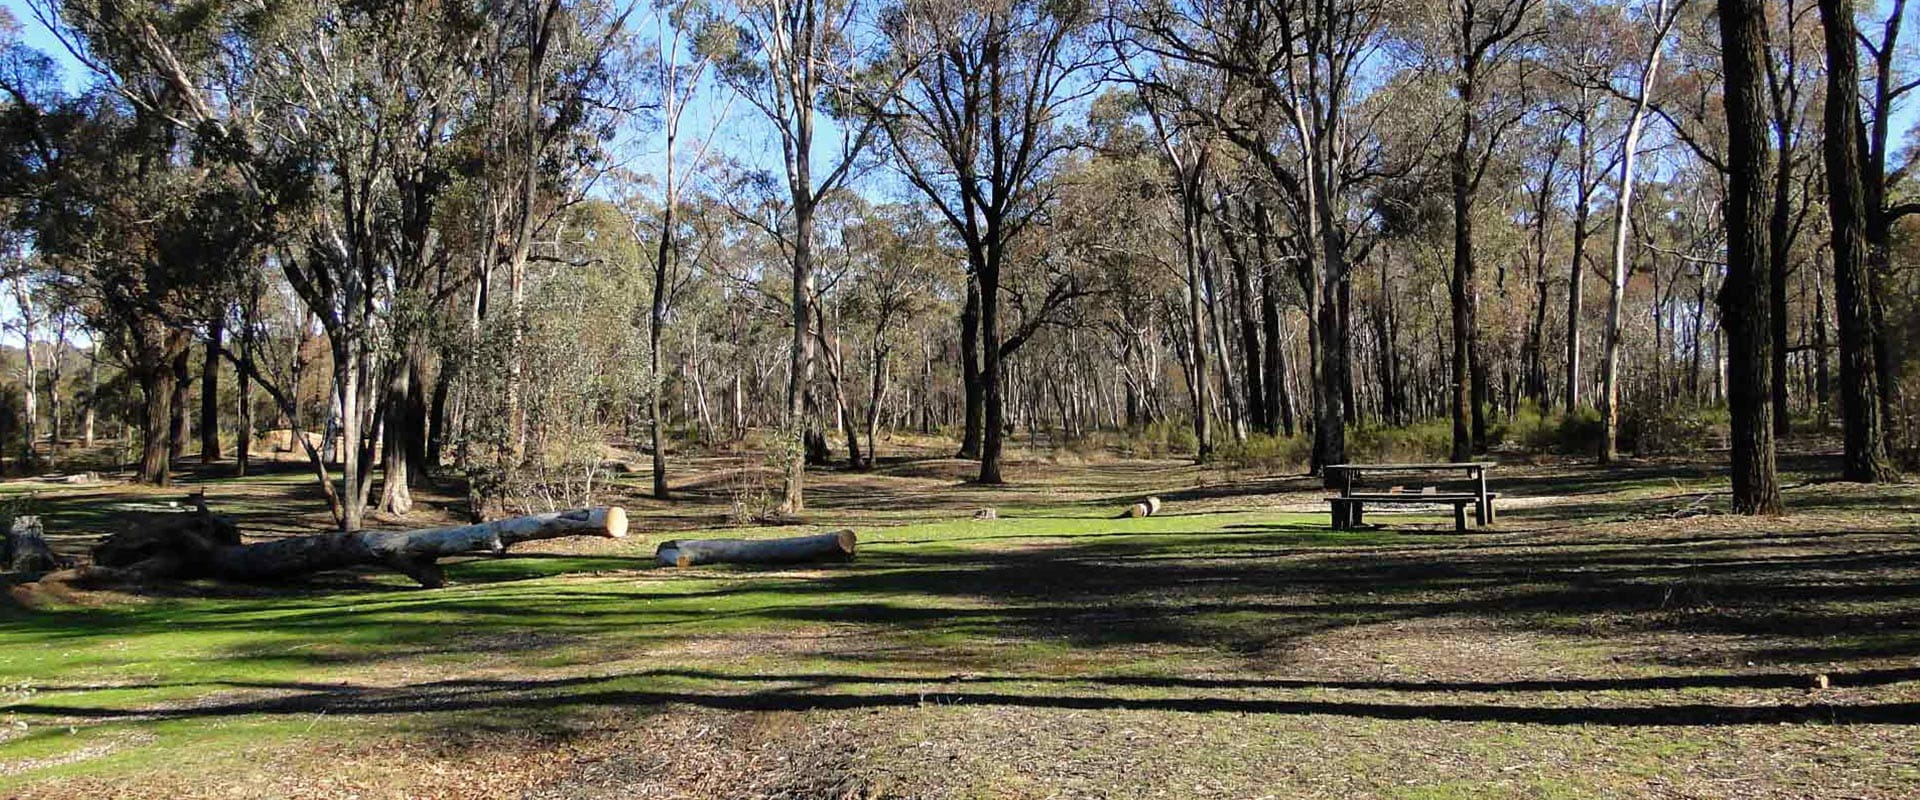 Notley Picnic Ground in the Greater Bendigo National Park